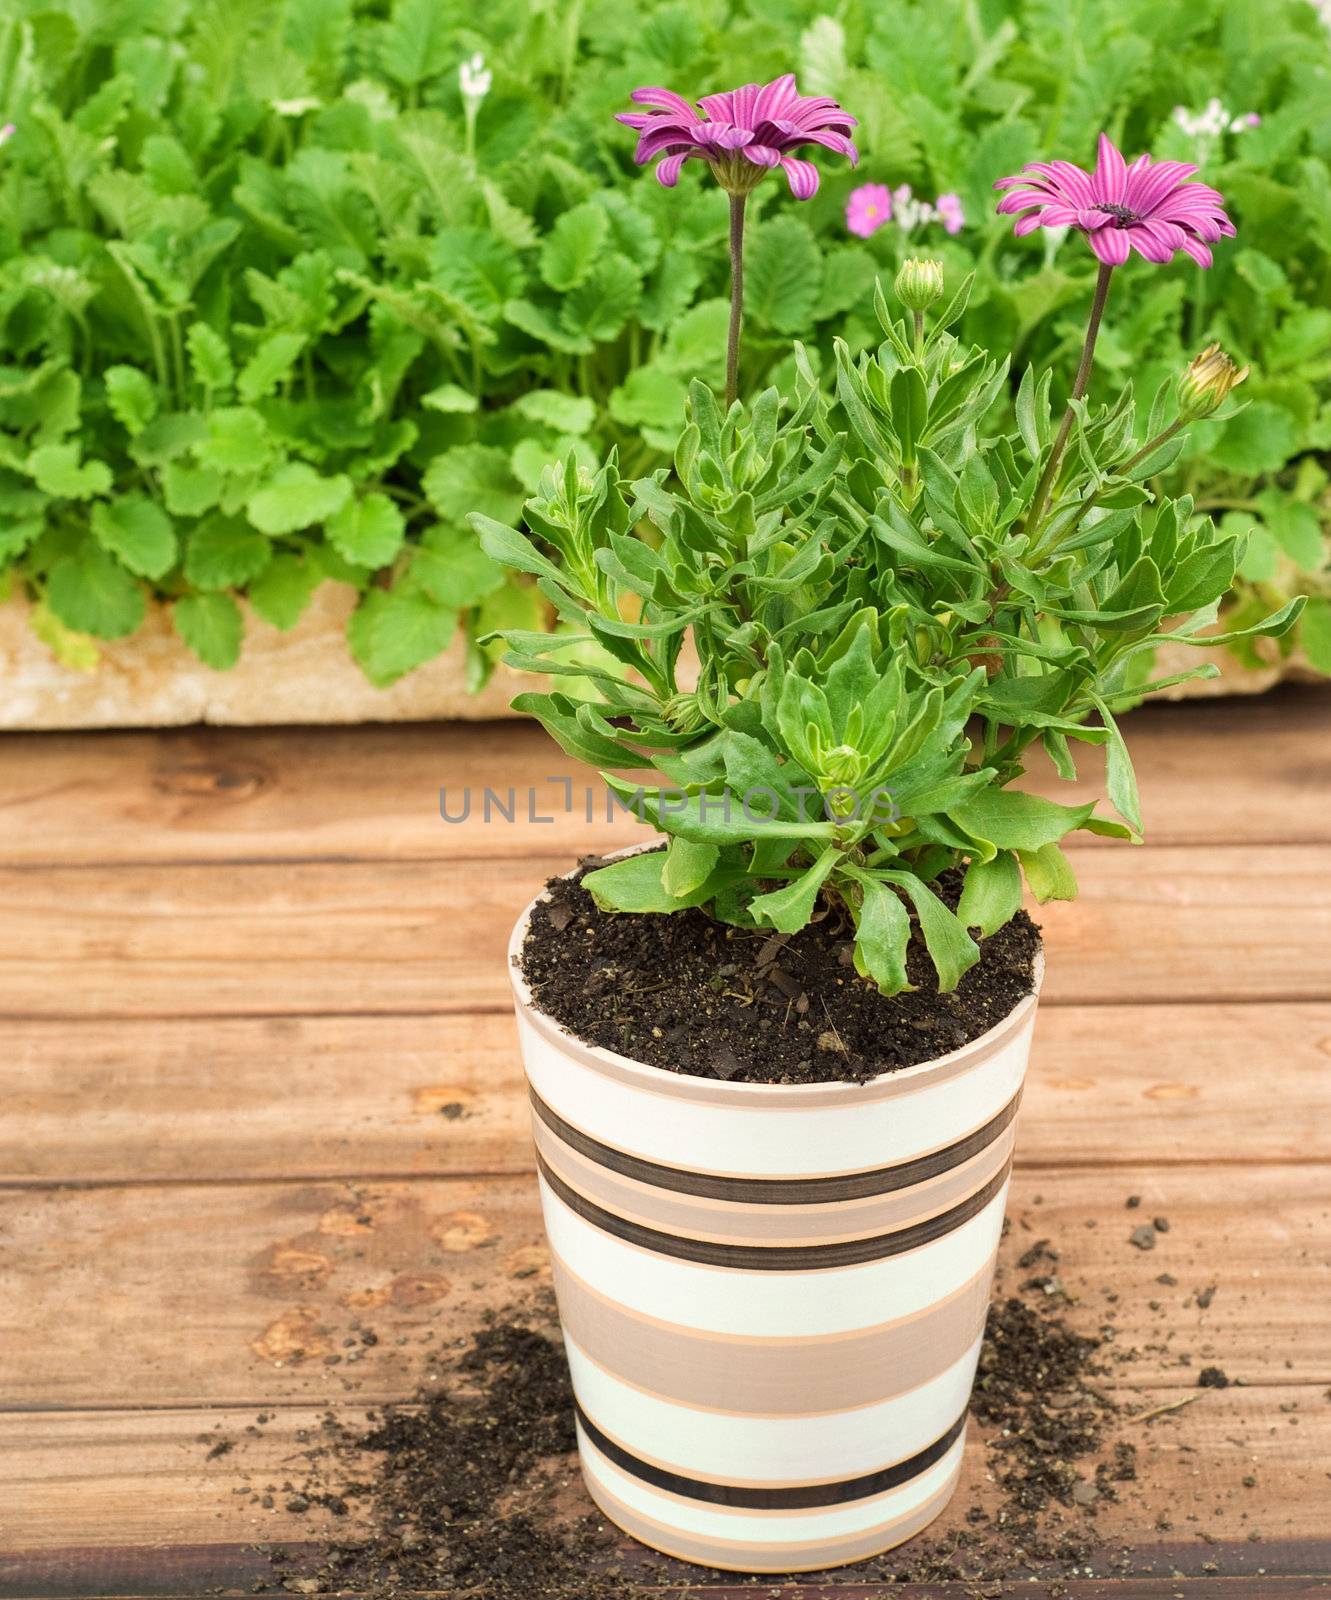 Ceramic Flower Pot Infront of Seedling Tray, Potted Purple Flower